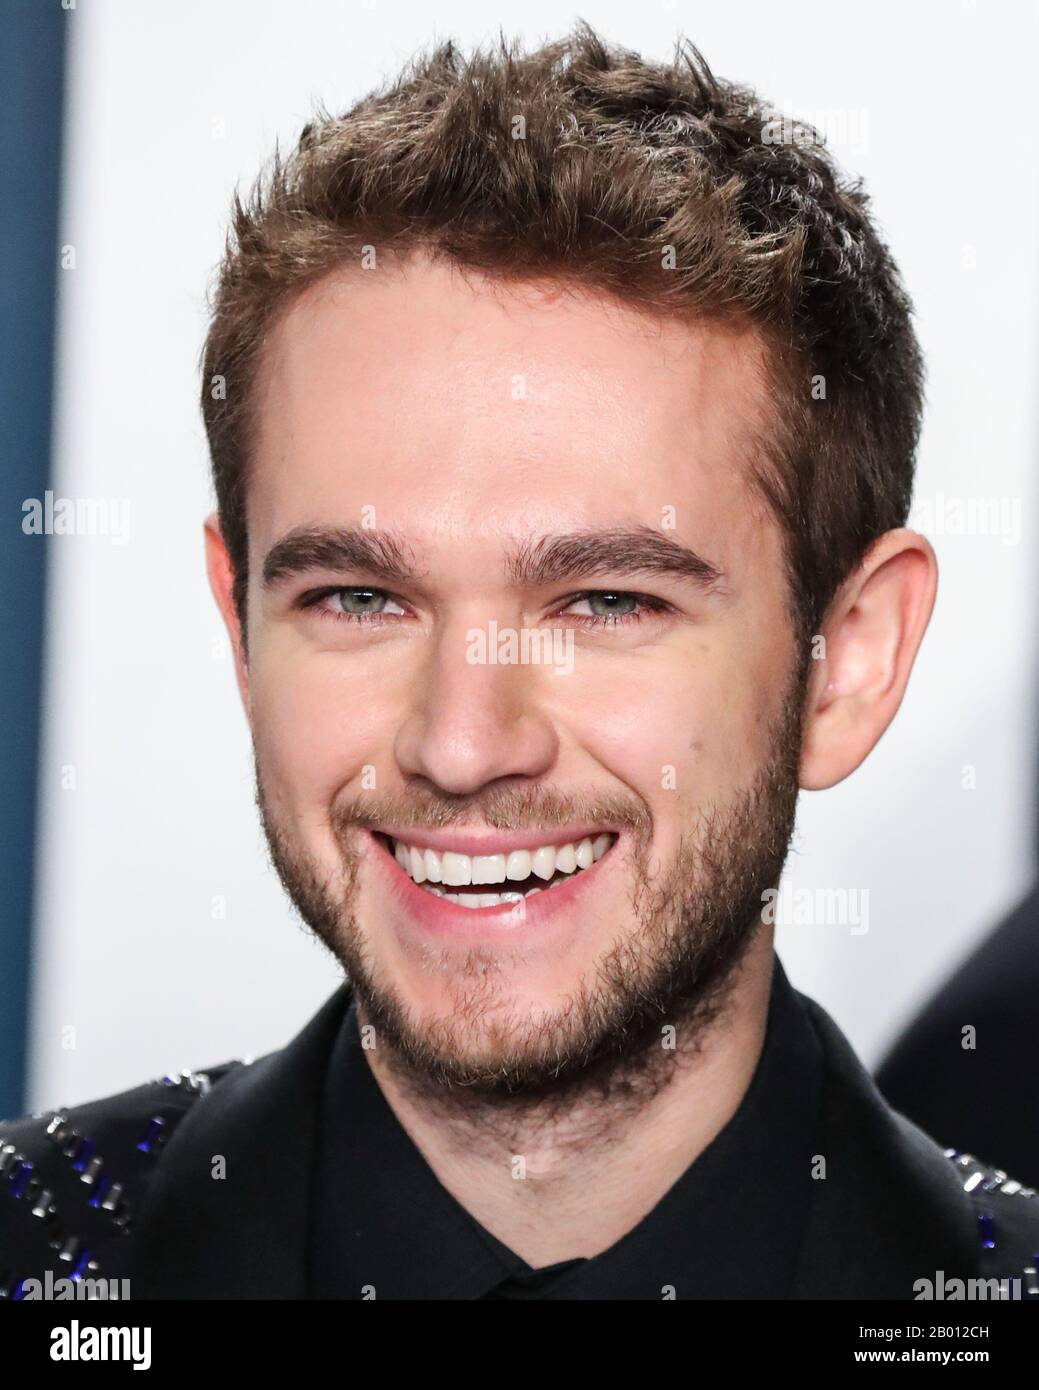 BEVERLY HILLS, LOS ANGELES, CALIFORNIA, USA - FEBRUARY 09: Zedd arrives at the 2020 Vanity Fair Oscar Party held at the Wallis Annenberg Center for the Performing Arts on February 9, 2020 in Beverly Hills, Los Angeles, California, United States. (Photo by Xavier Collin/Image Press Agency) Stock Photo